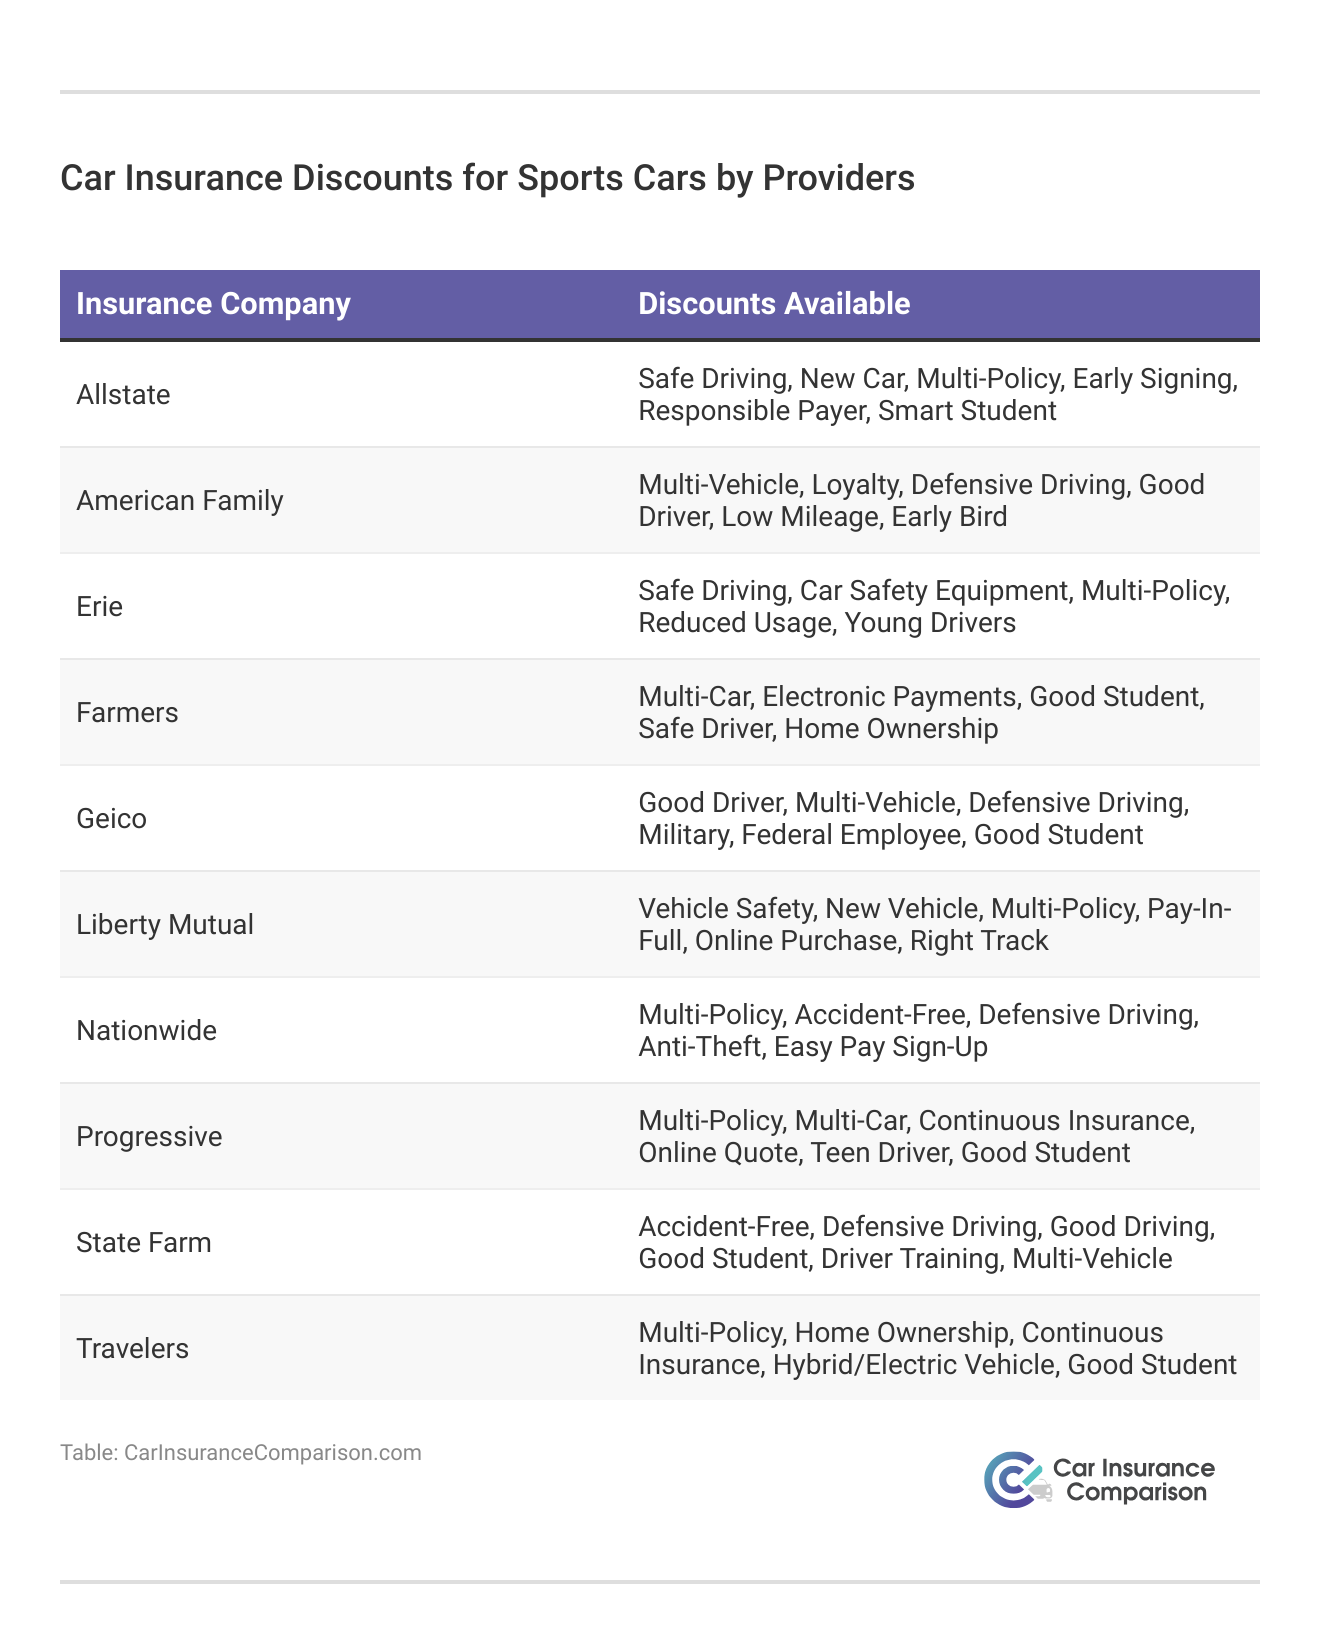 <h3>Car Insurance Discounts for Sports Cars by Providers</h3>